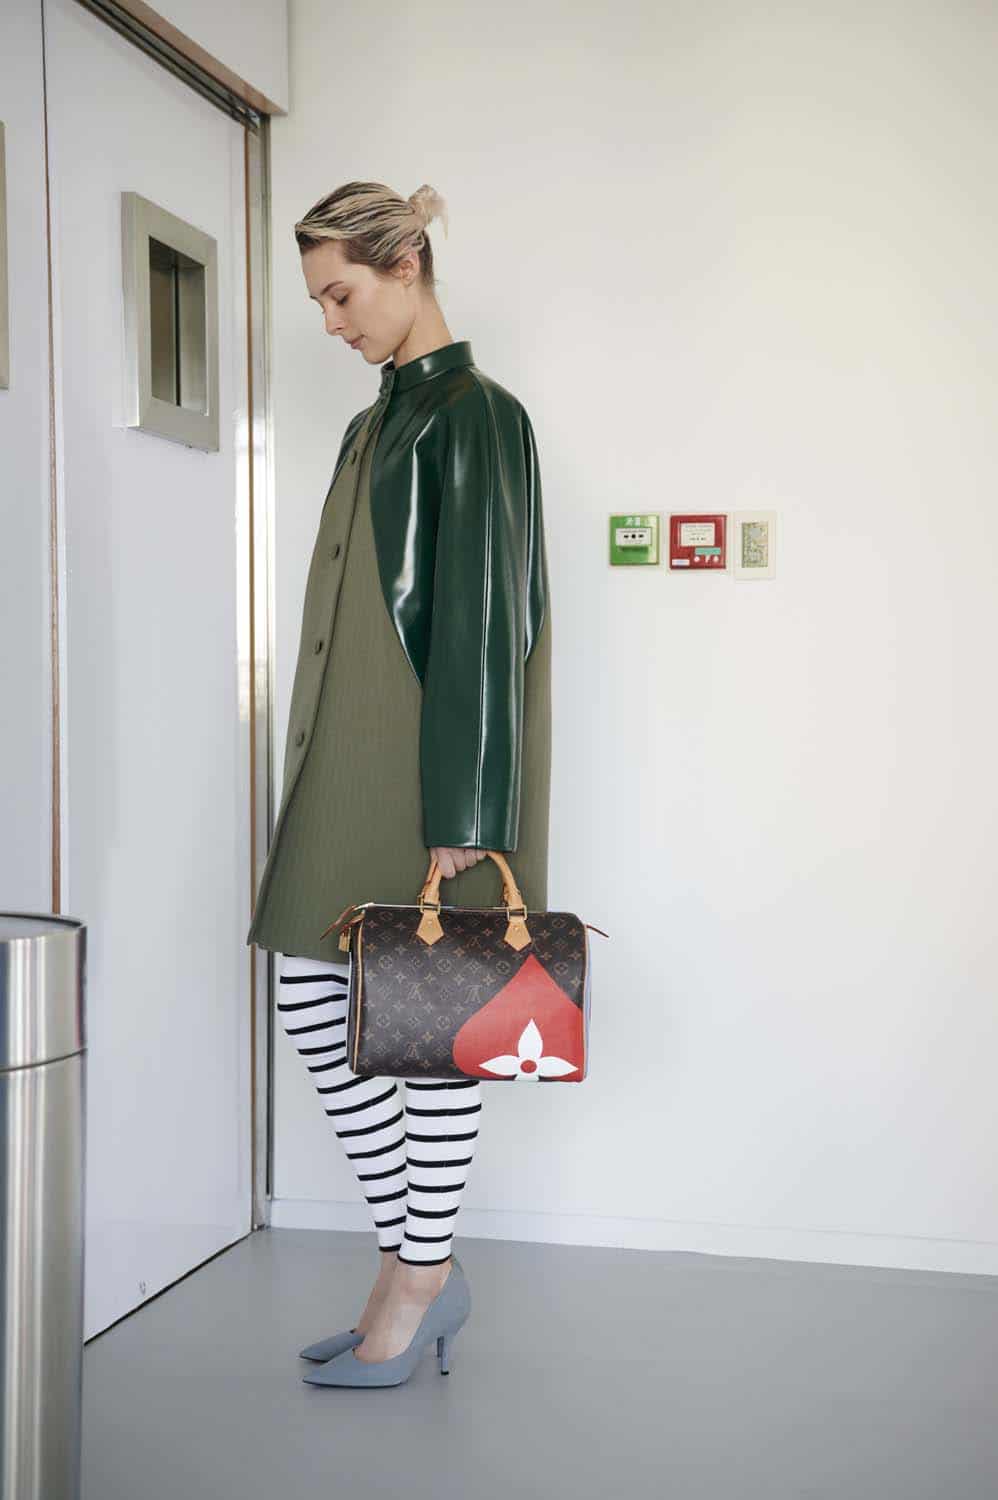 Louis Vuitton Cruise 2021 Collection - Game On | Spotted Fashion